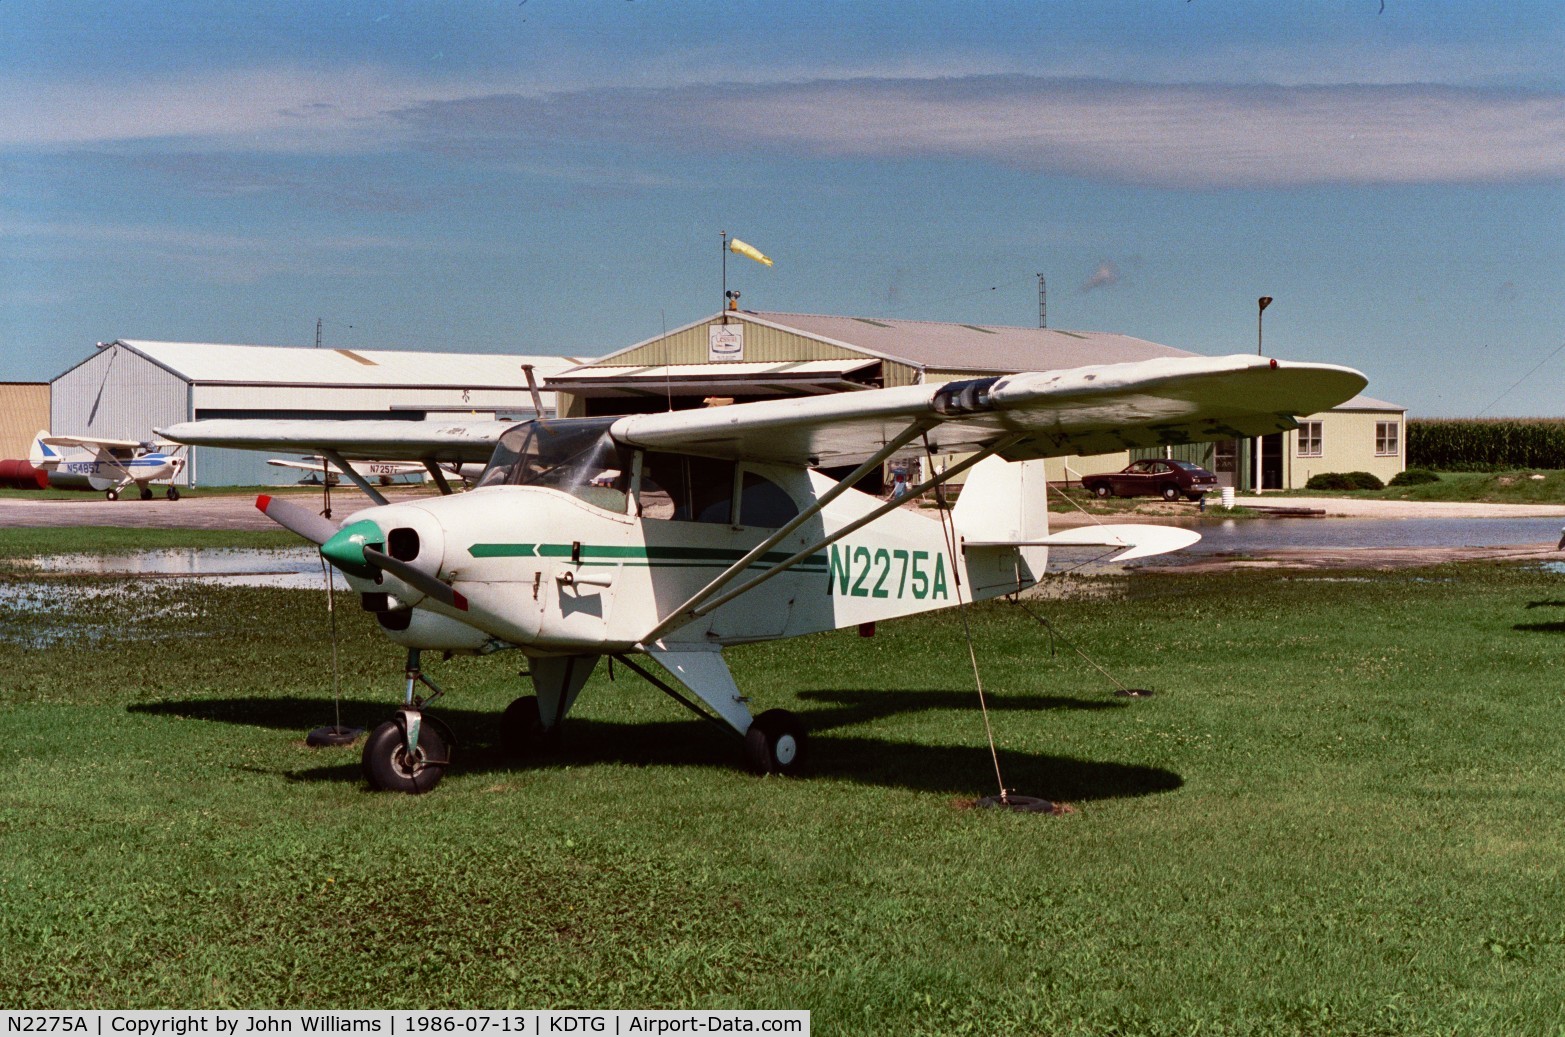 N2275A, 1952 Piper PA-22-135 Tri-Pacer C/N 22-664, Photo taken at Dwight, IL airport, summer 1986.